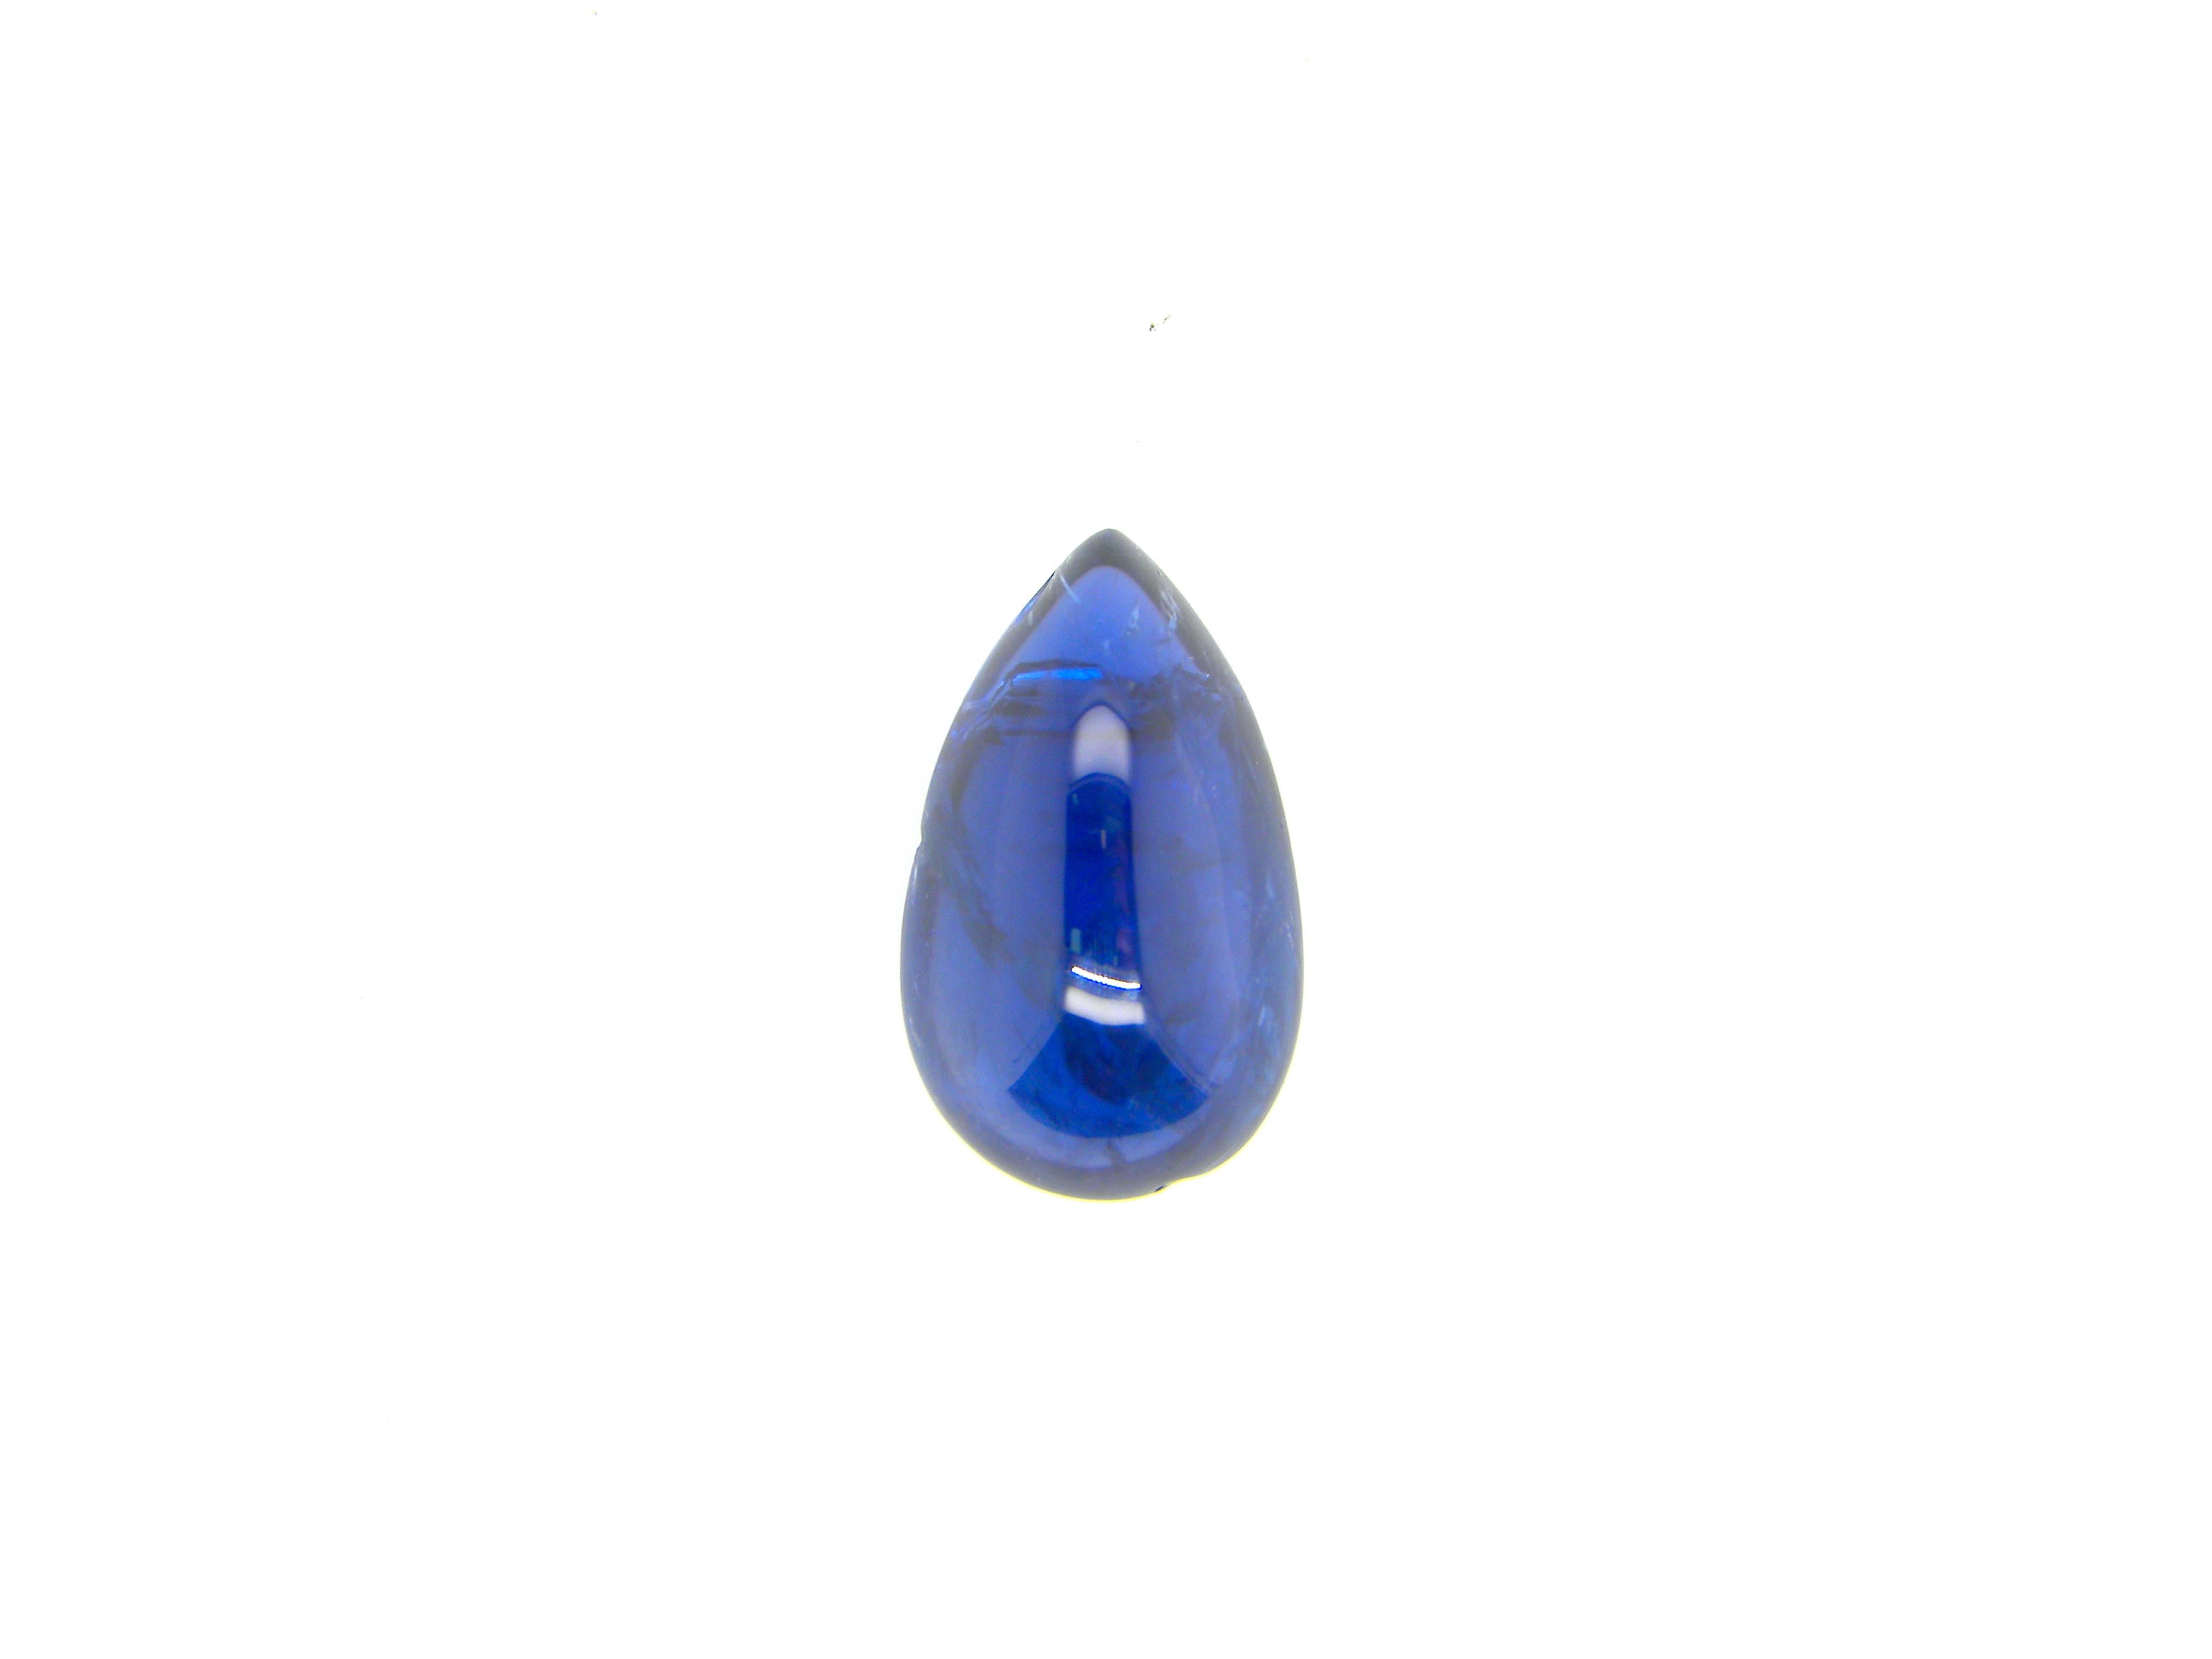 4.79 Carat Pear-Shaped Burma No Heat Royal Blue Sapphire Cabochon: 

A gorgeous gem, it is a 4.79 carat pear-shaped unheated Burmese sapphire cabochon. Hailing from the historic Mogok mines in Burma, the sapphire possesses a royal vivid blue colour